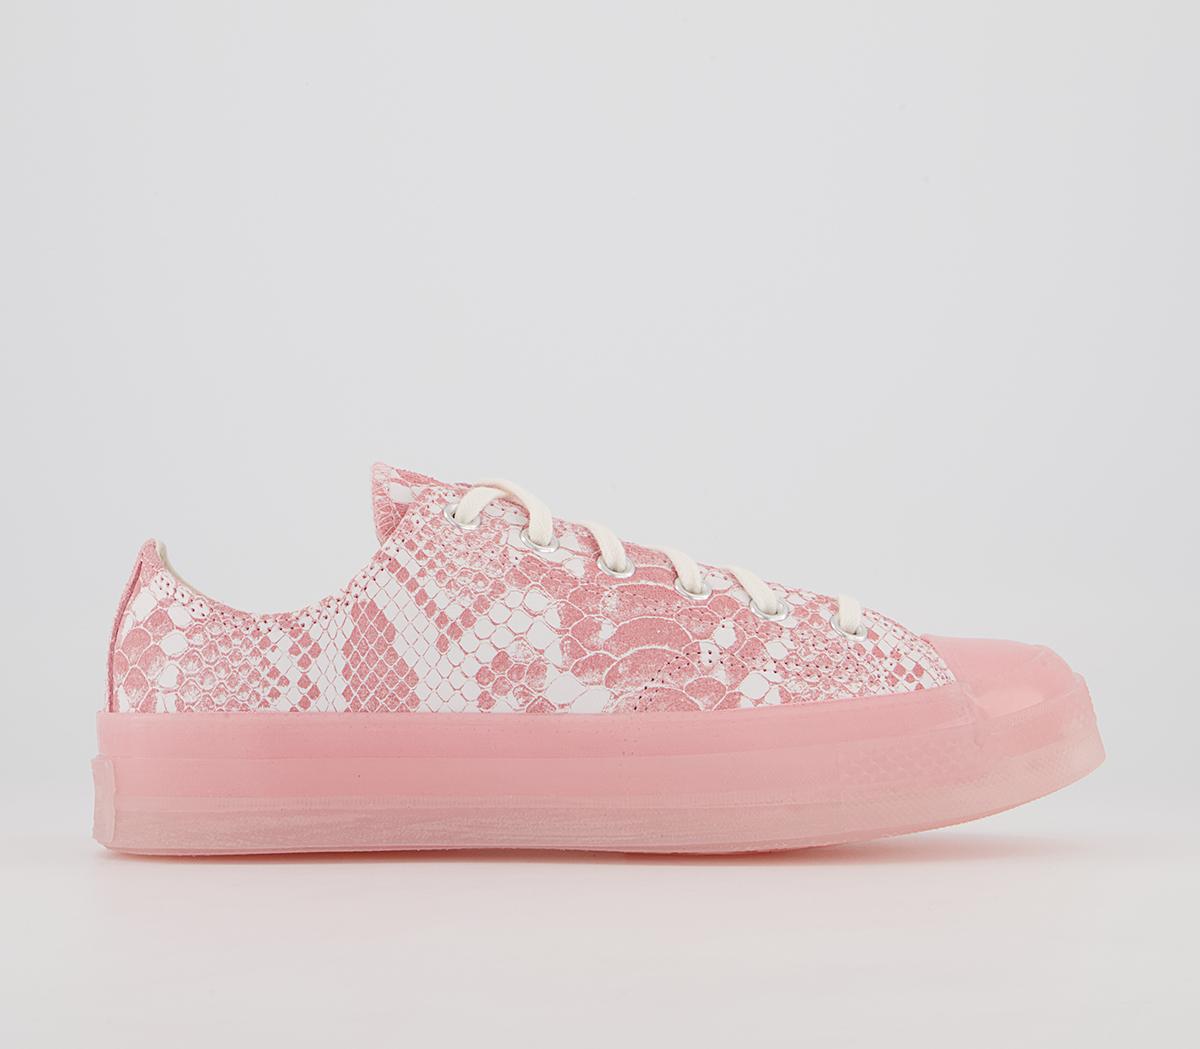 ConverseAll Star Ox 70s TrainersGolf Wang Pink Dogwood Vintage White